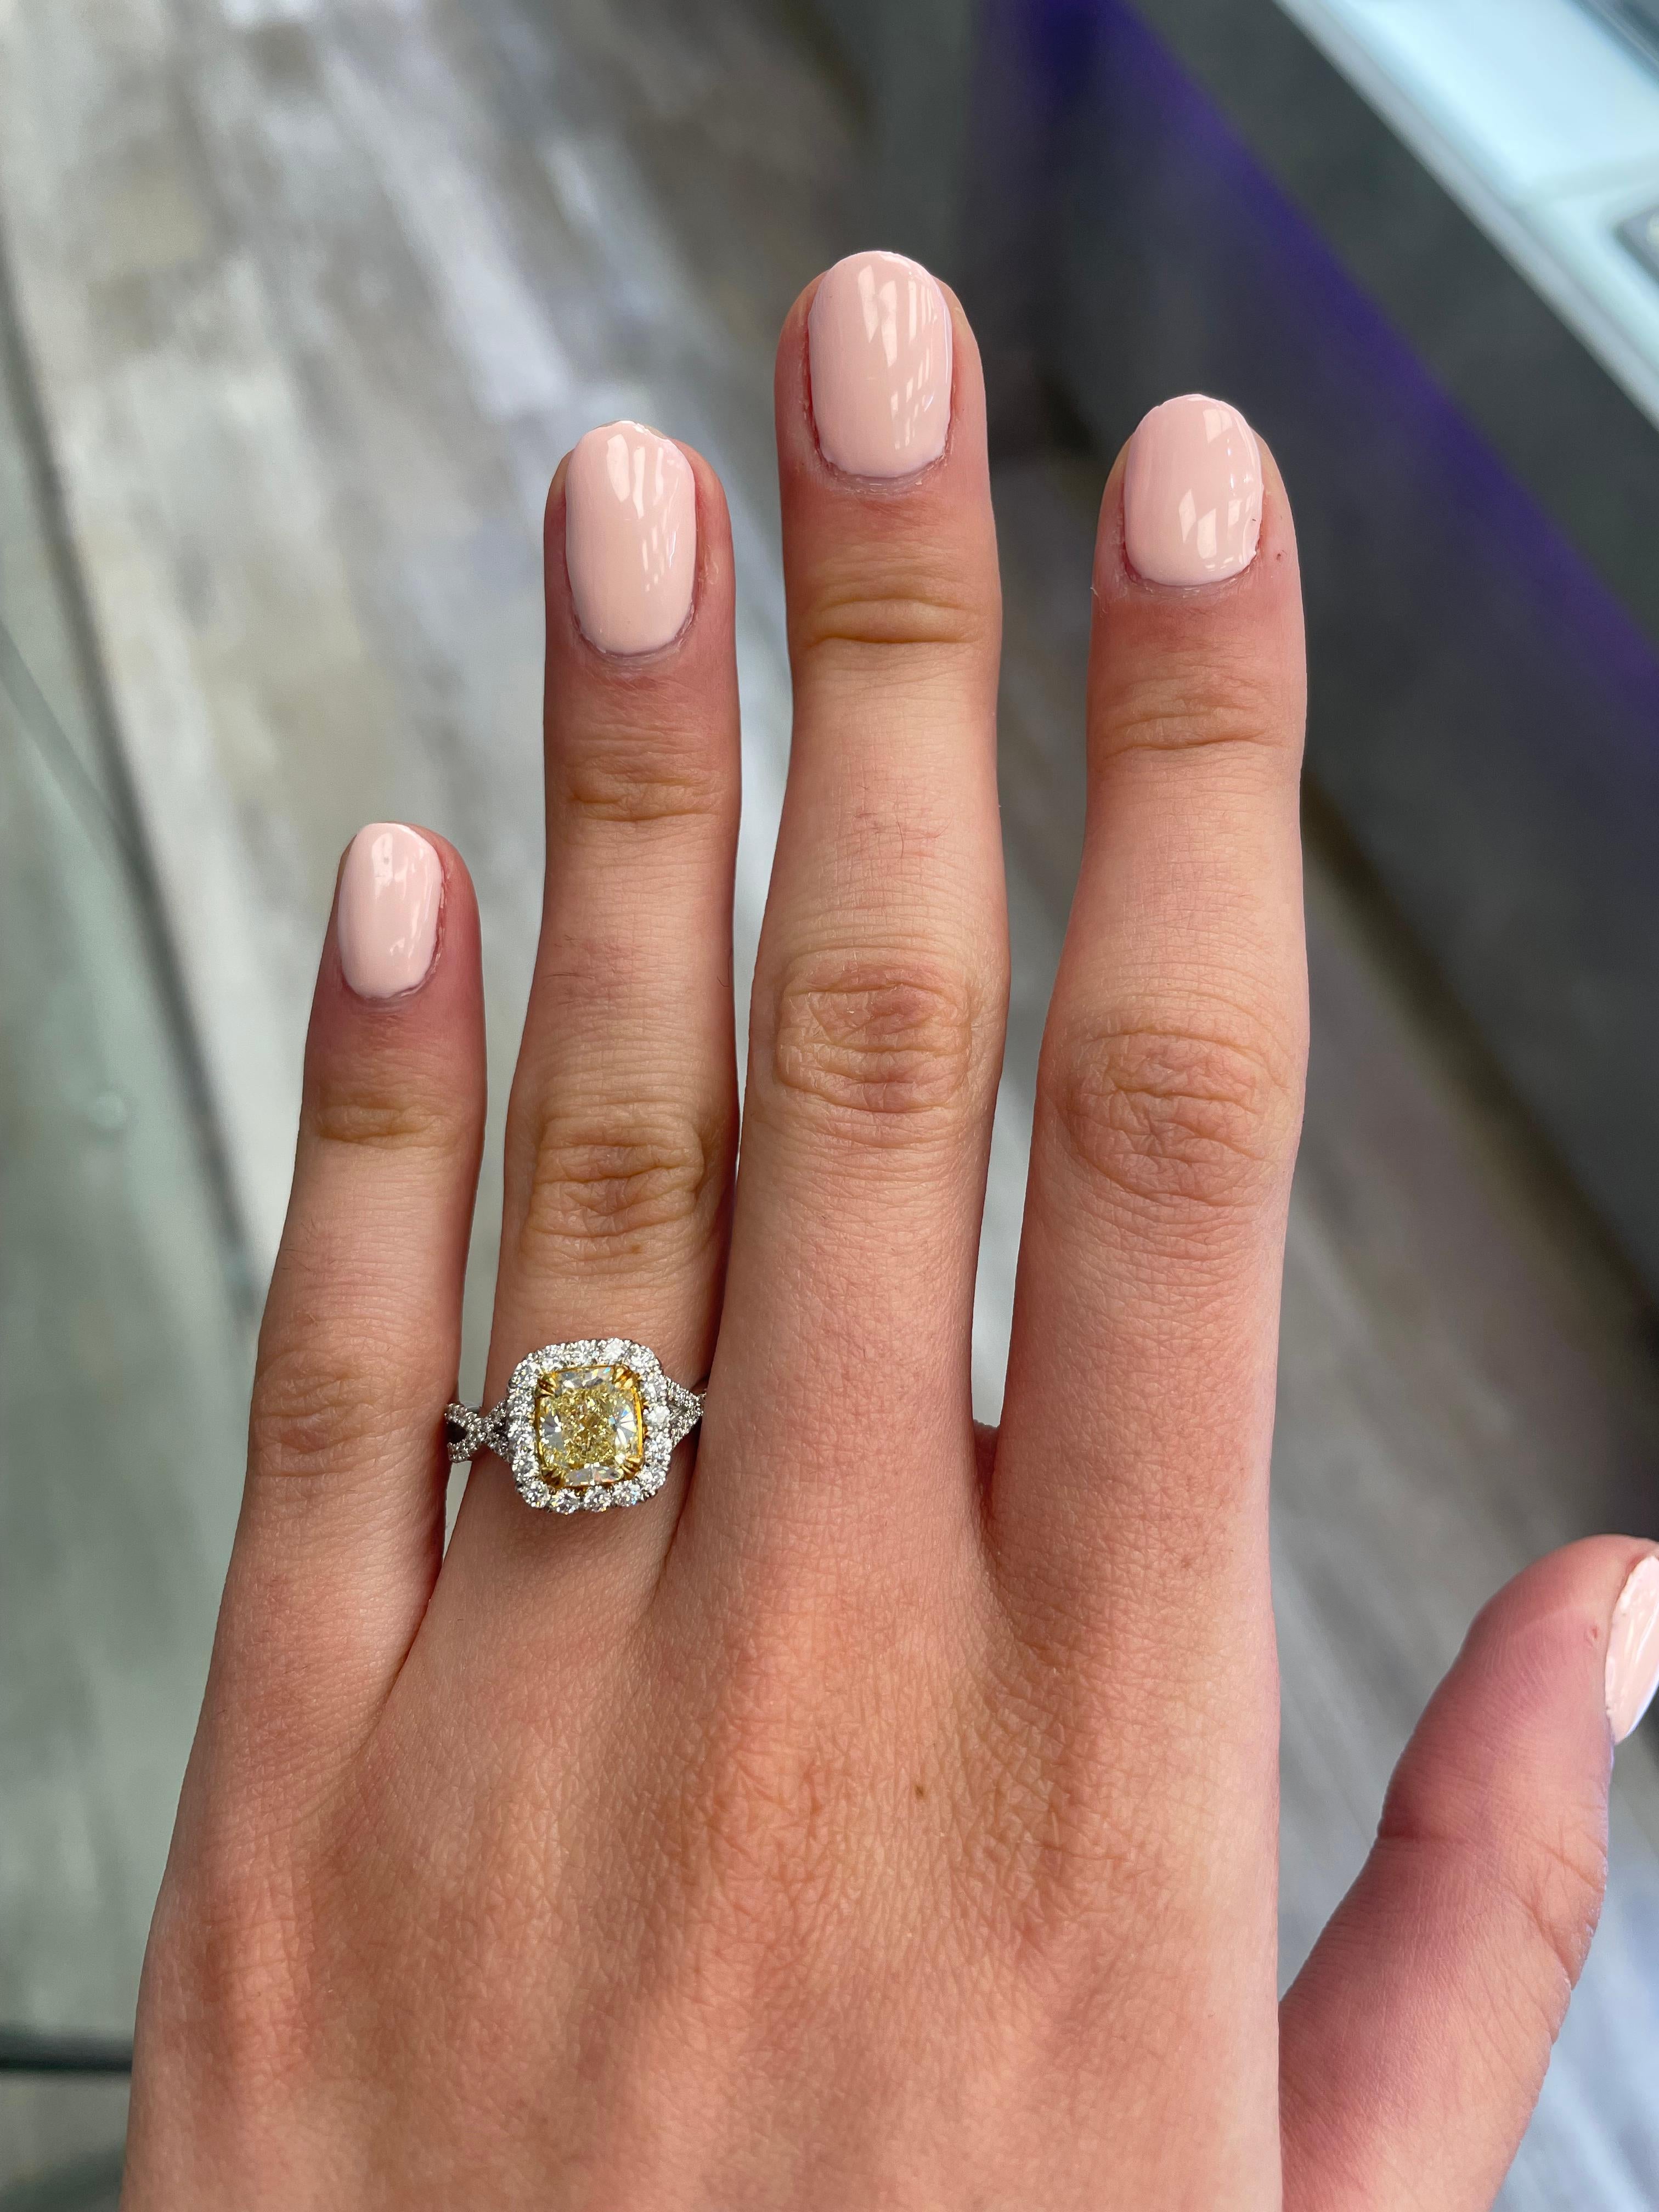 Stunning modern EGL certified yellow diamond with halo ring, two-tone 18k yellow and white gold, twist shank. By Alexander Beverly Hills
1.75 carats total diamond weight.
1.20 carat cushion cut Fancy Light Yellow color and VS2 clarity diamond, EGL